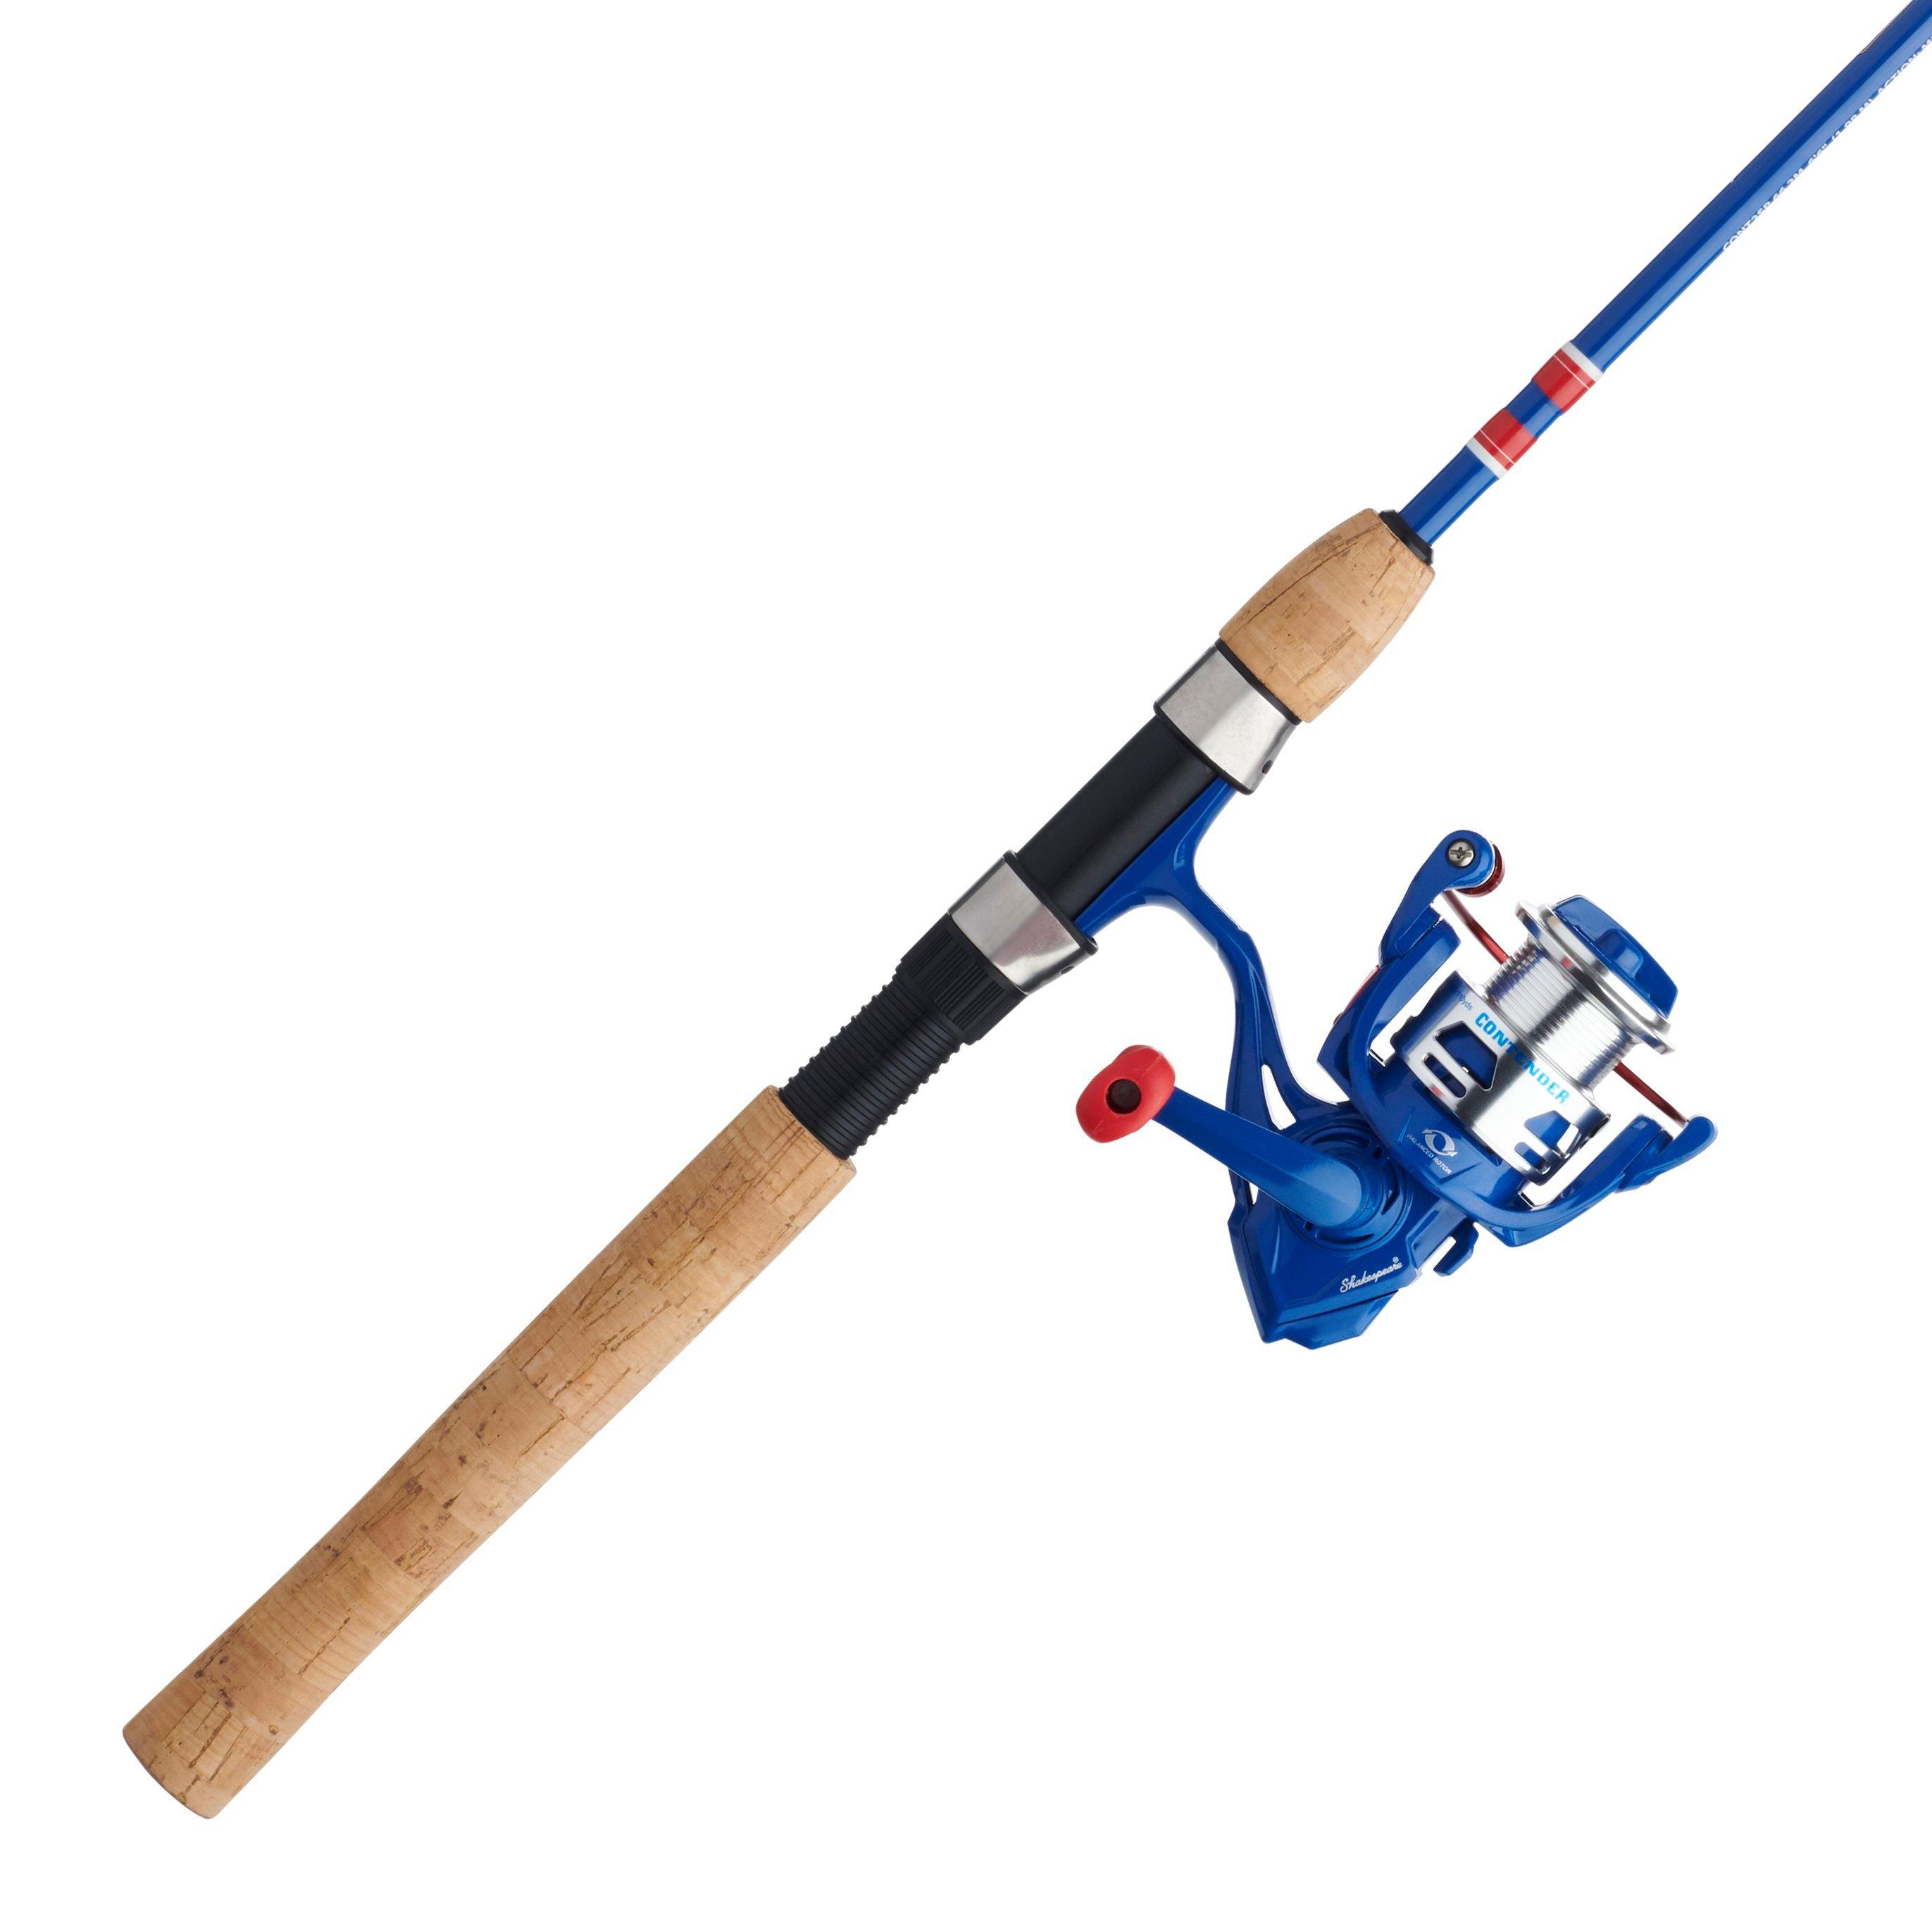 Shakespeare Contender Spinning Rod & Reel Combo , Up to $2.00 Off